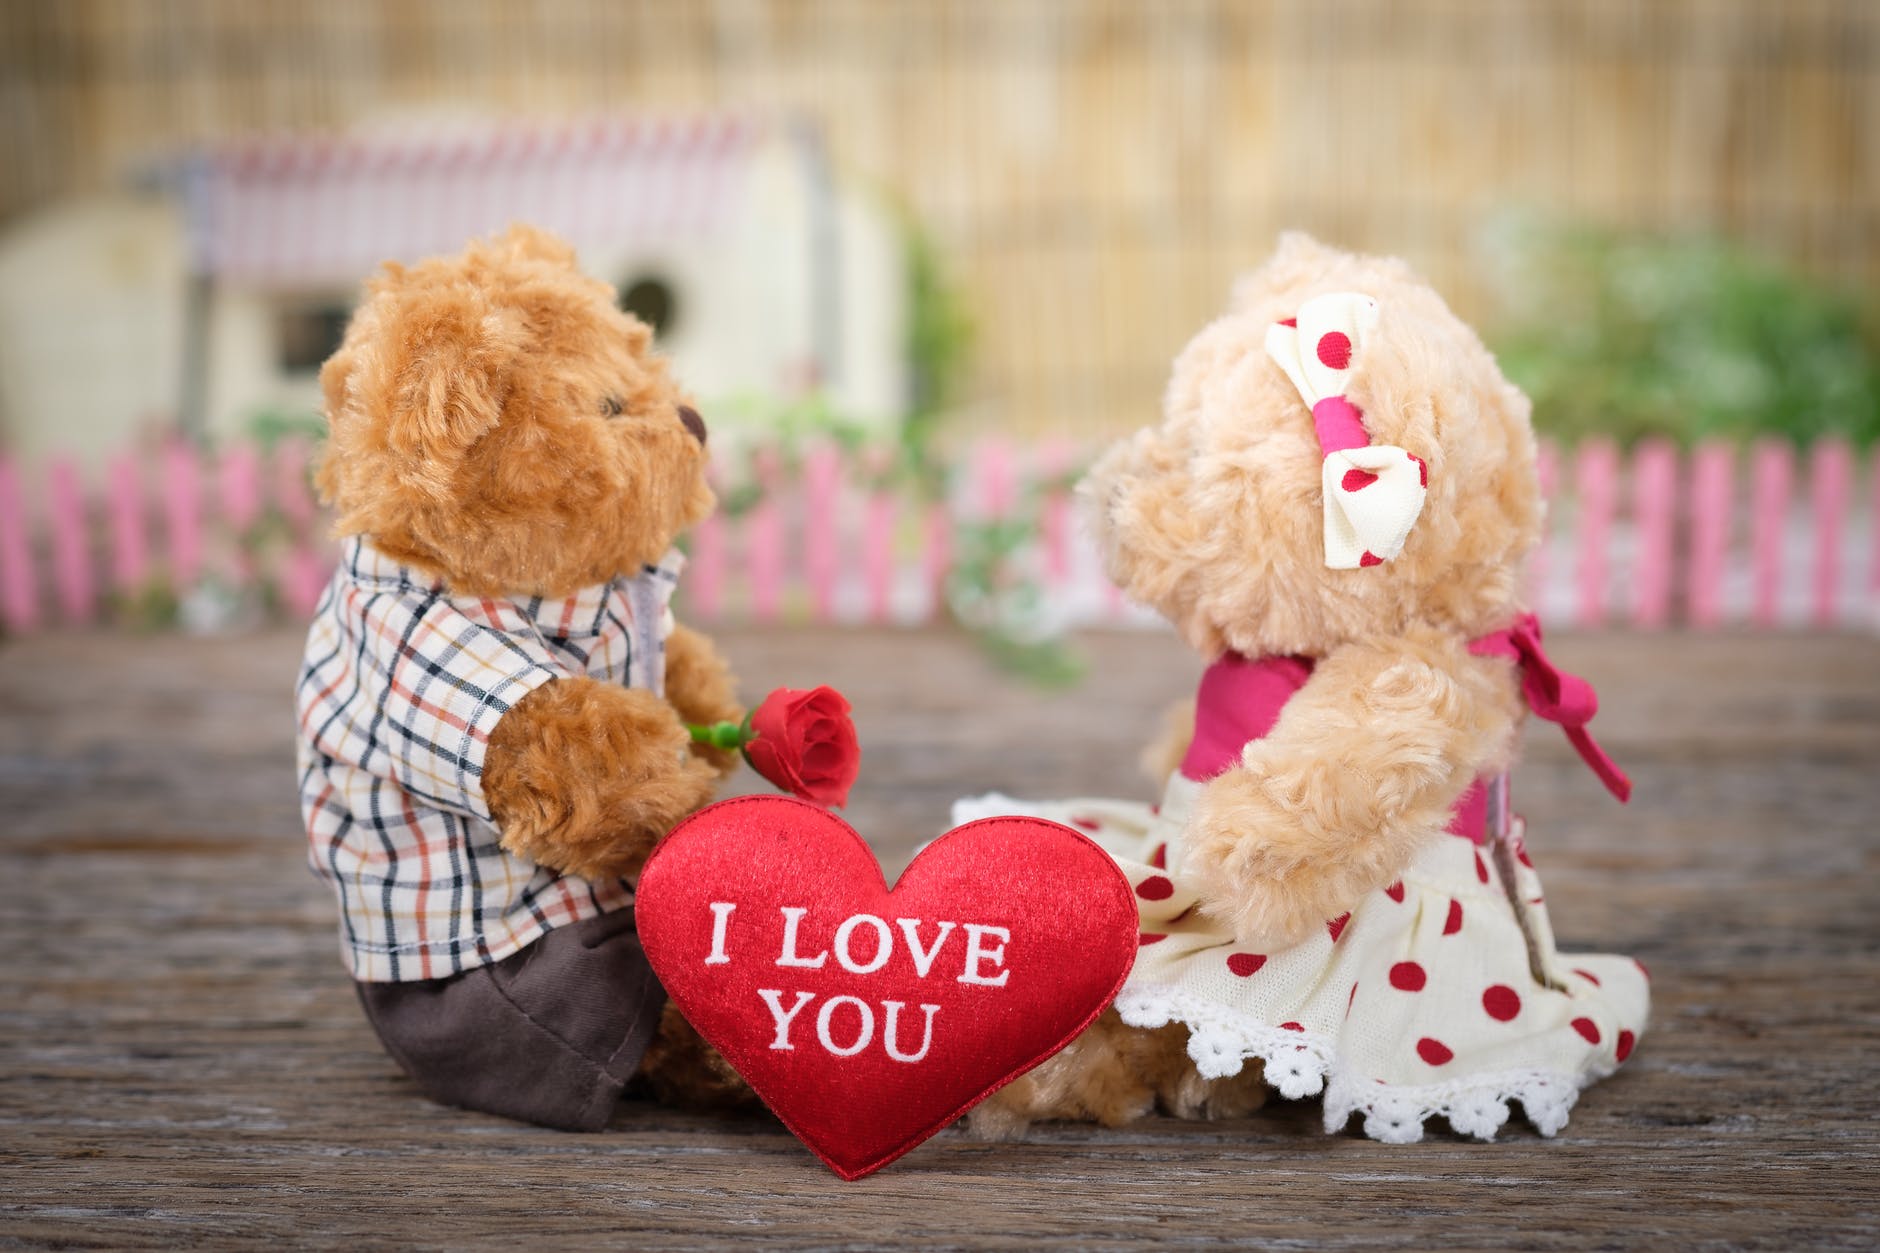 Two bears facing each other with an I love you heart shaped pillow